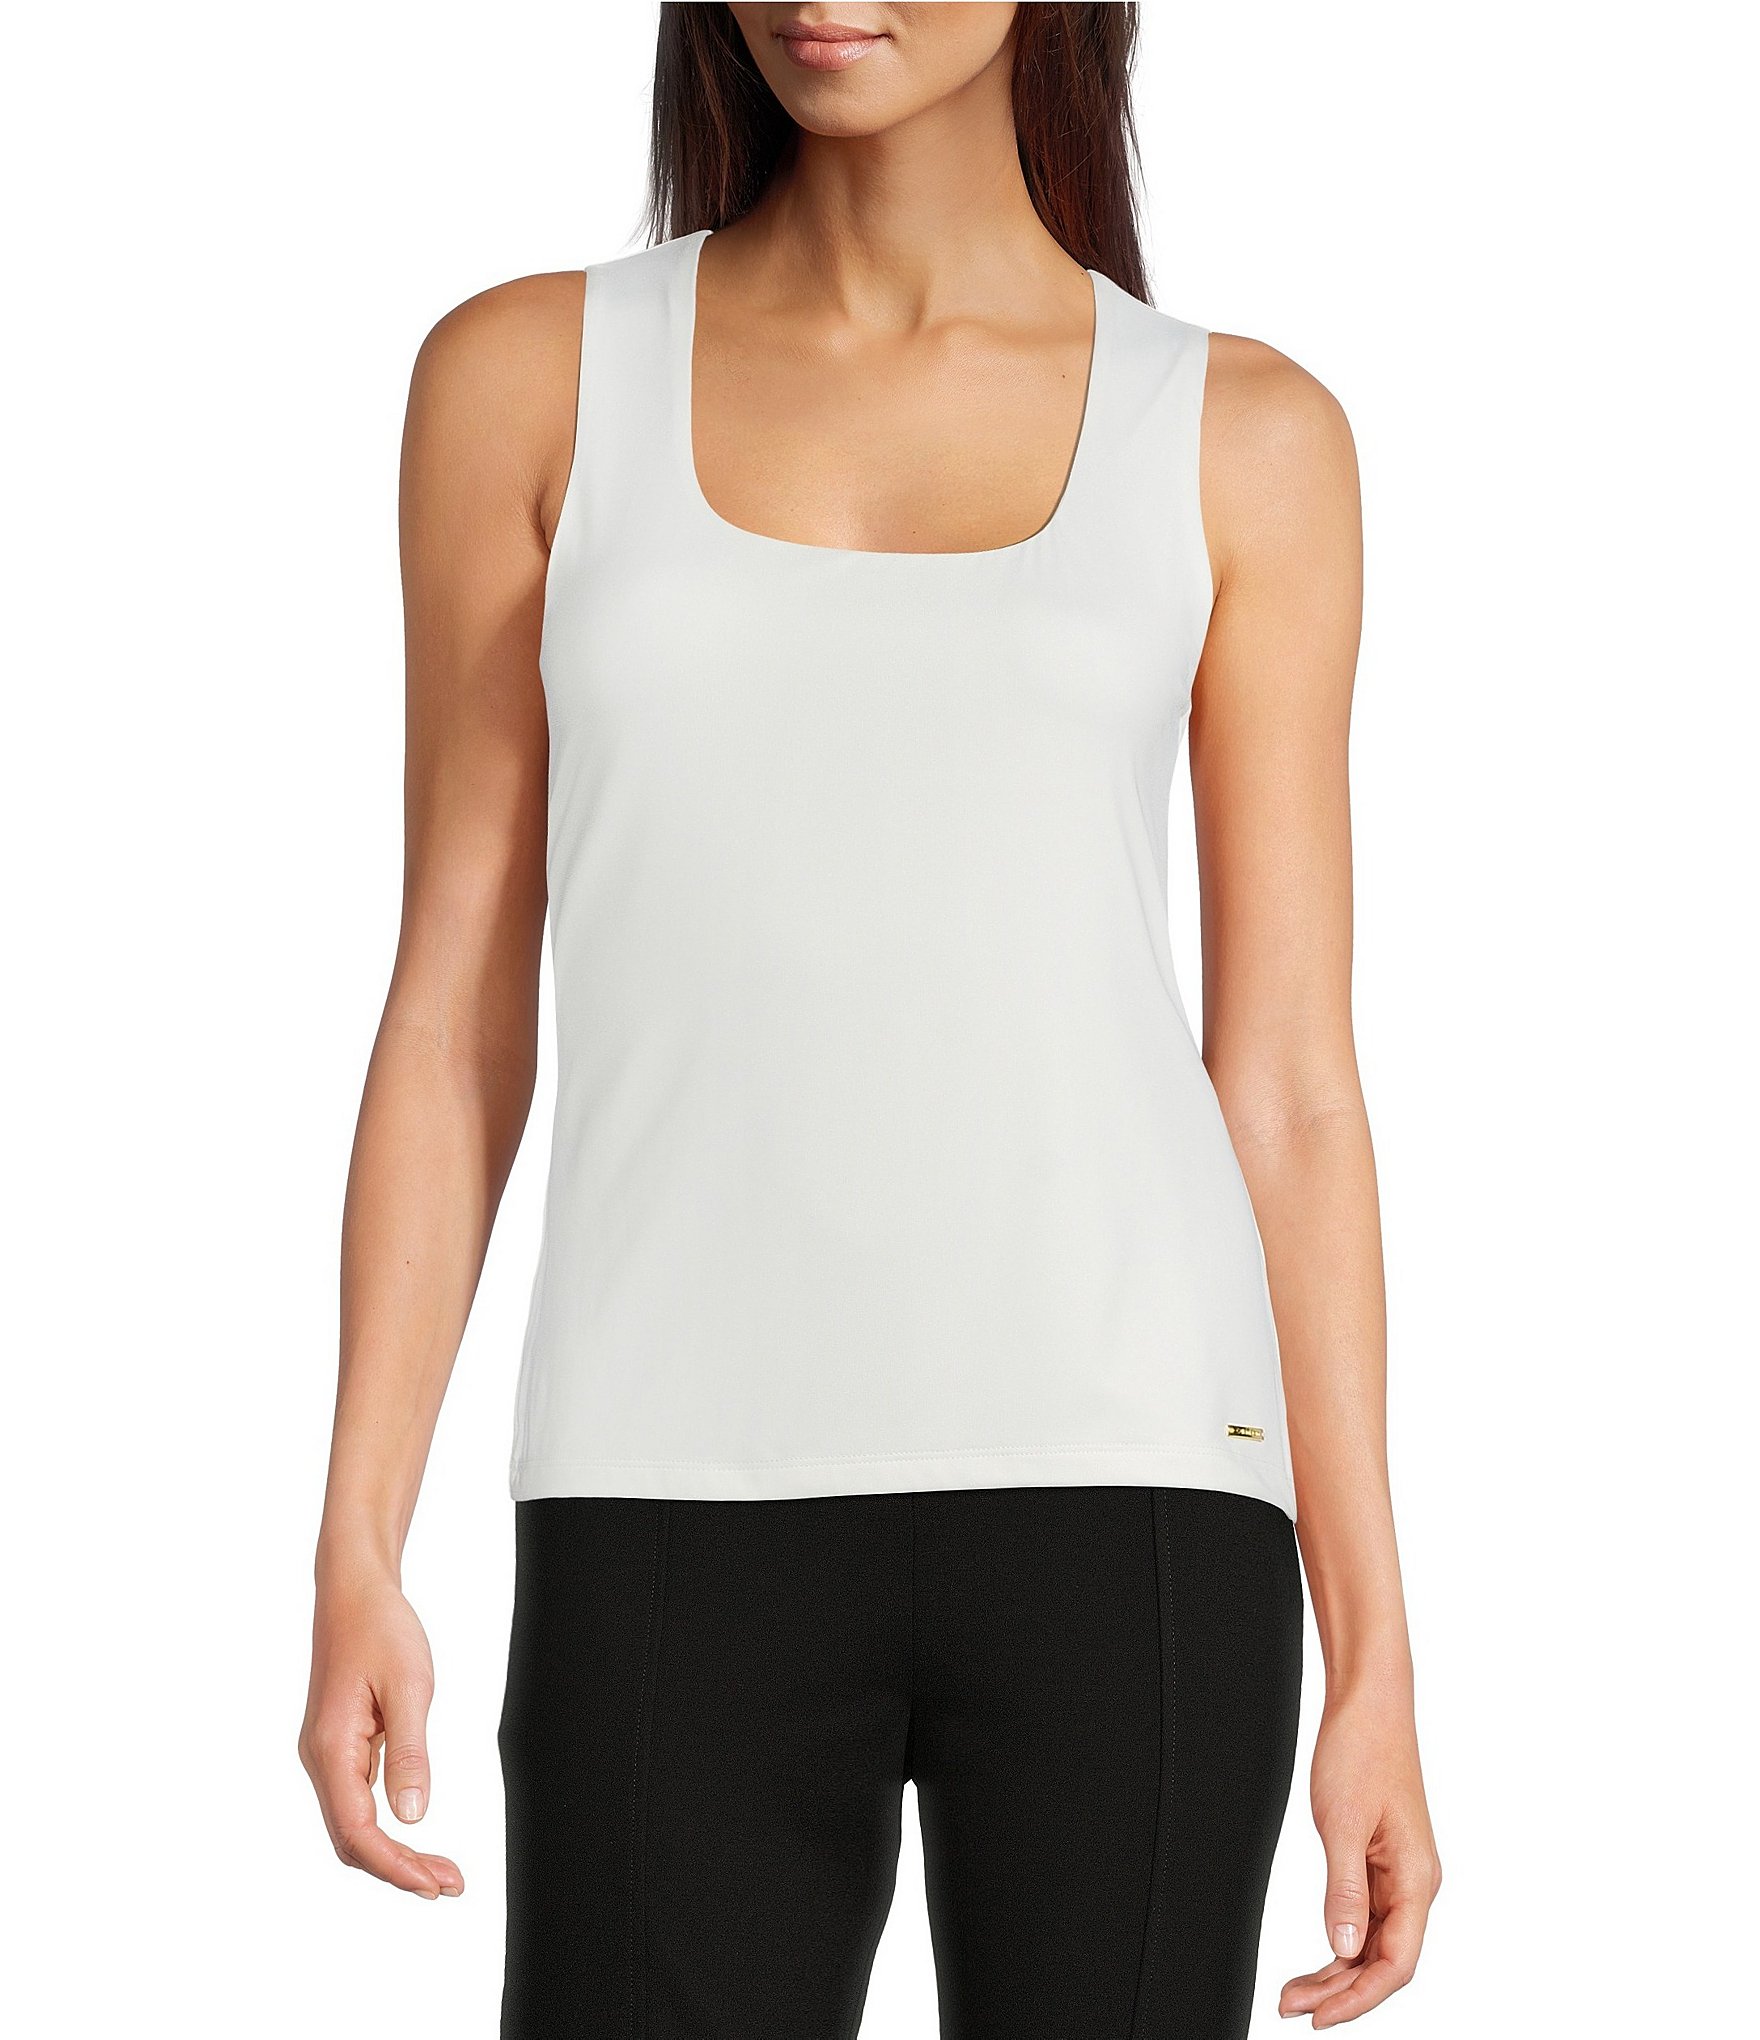 Wholesale6700/6170 - Form Fit Seamless Tanks-IVORY Scoop Neck